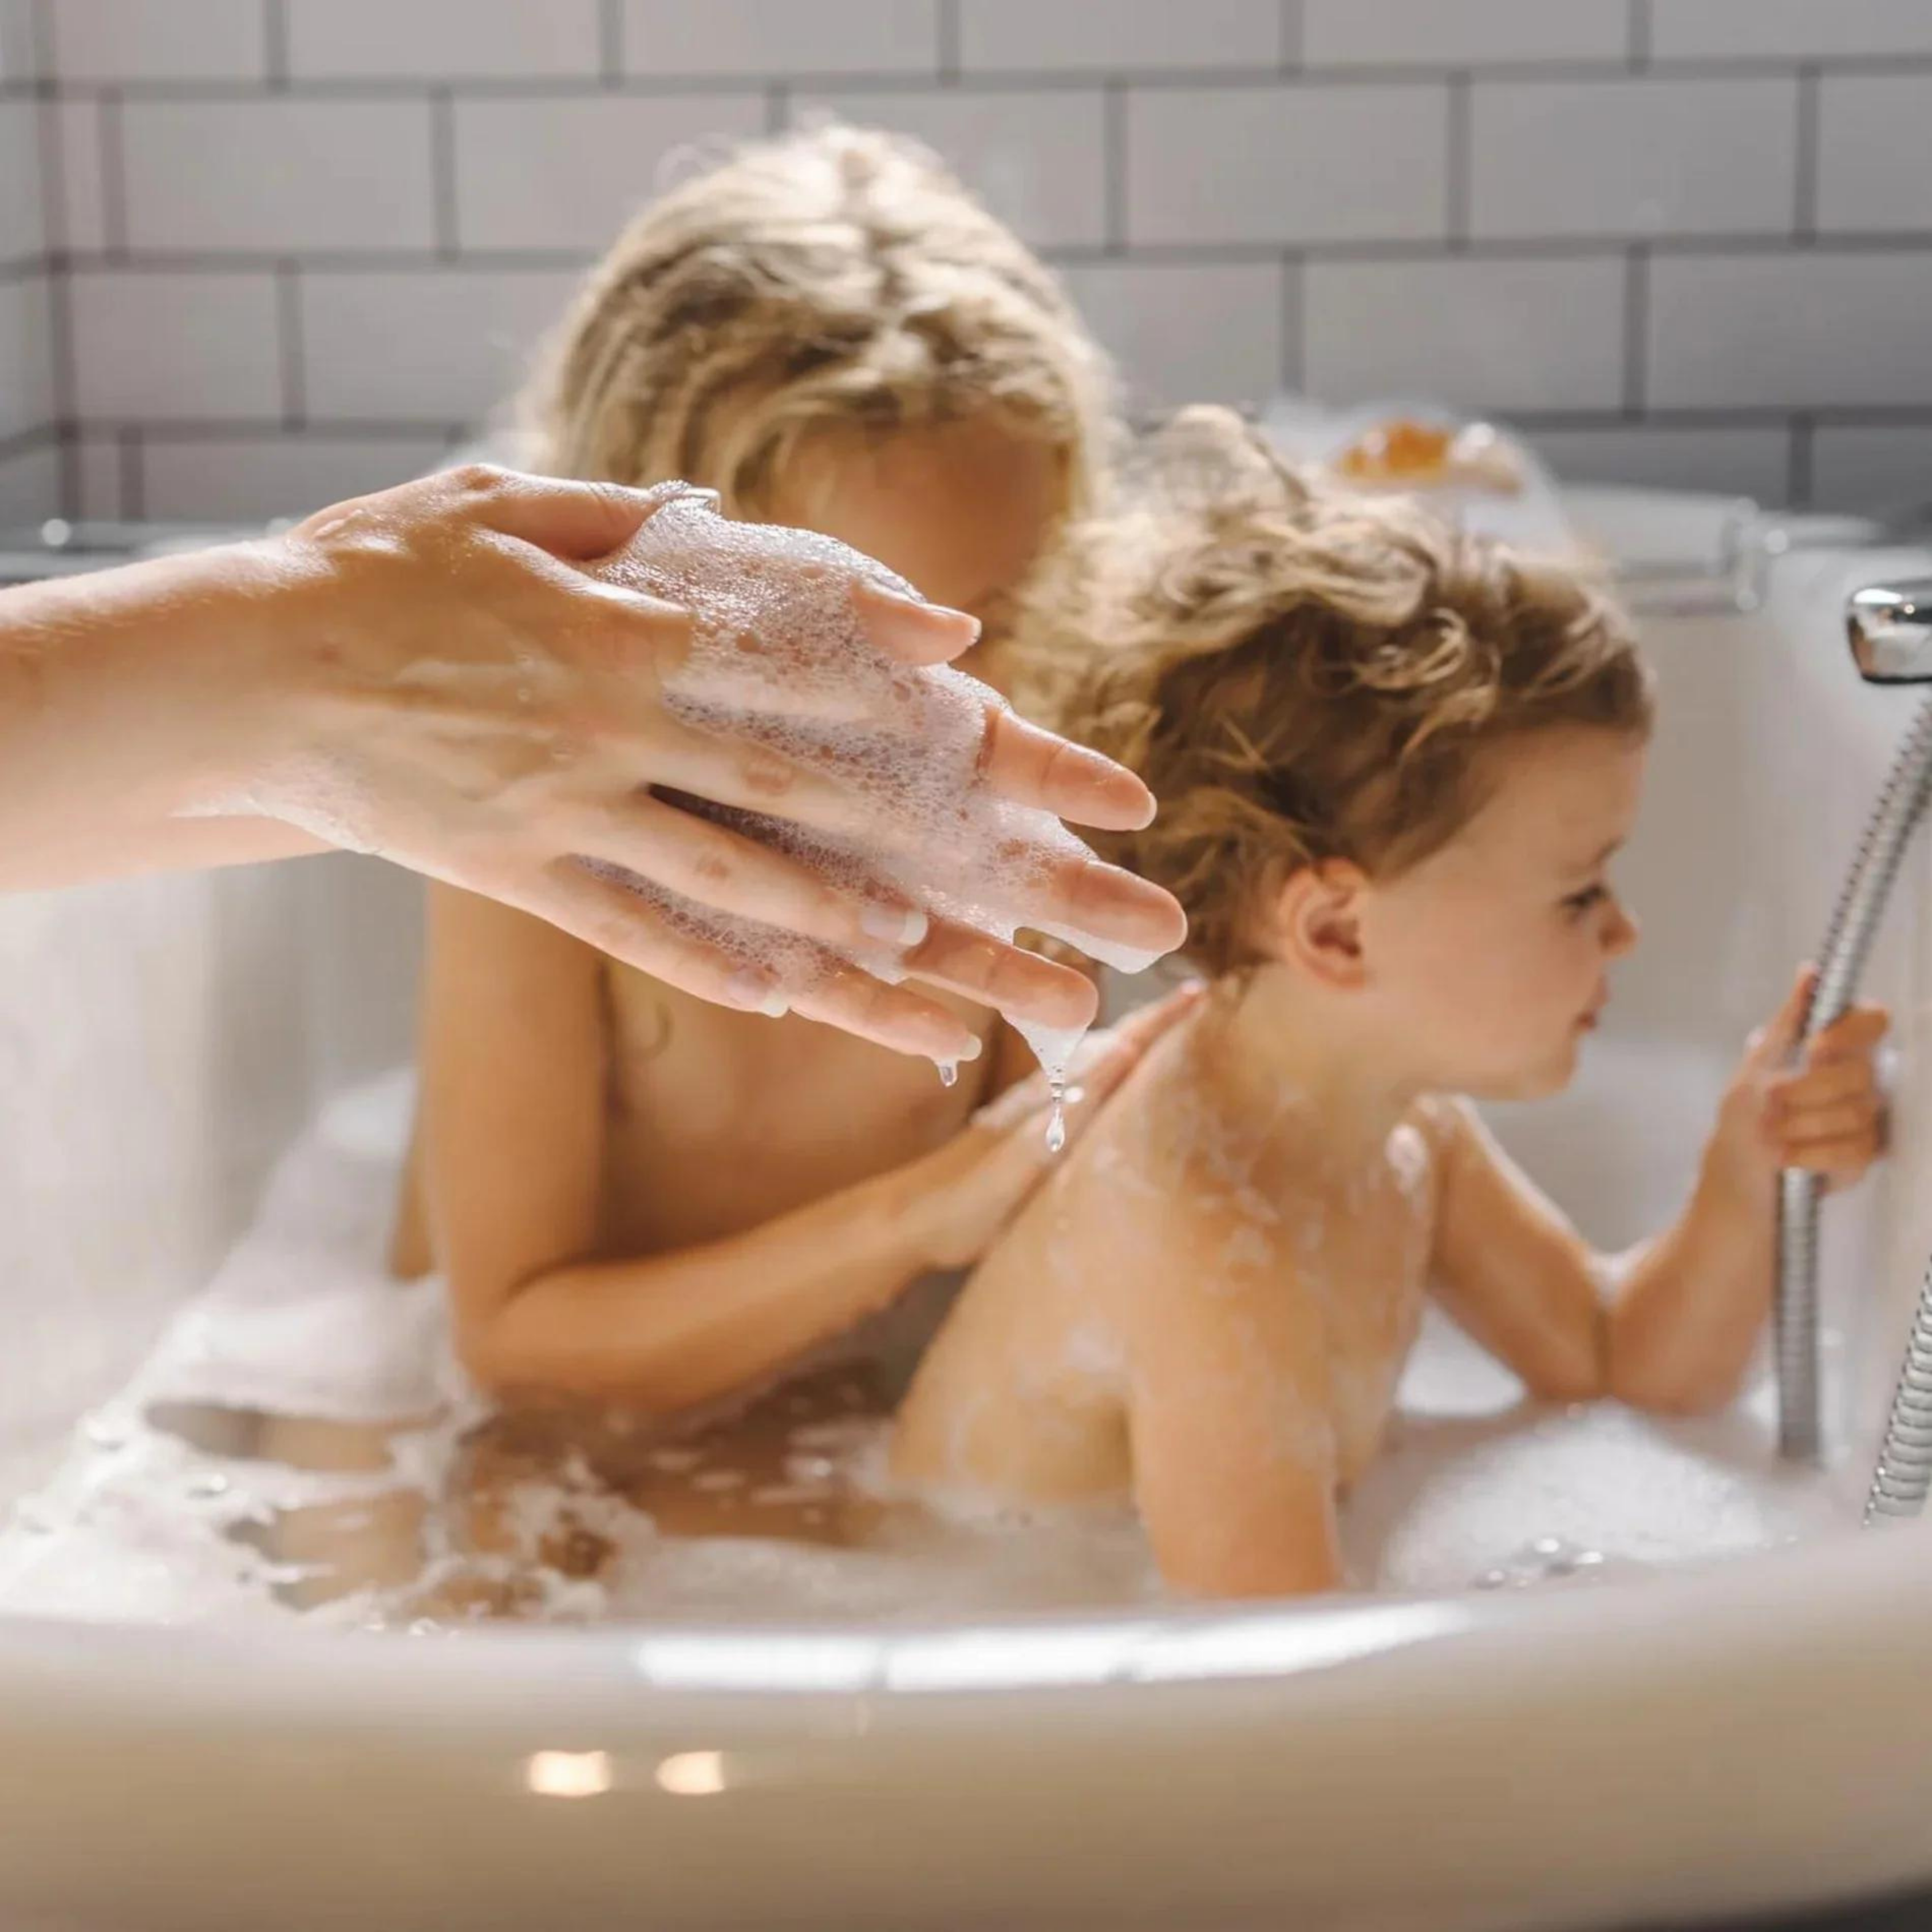 self-care products for little ones: a mother's perspective